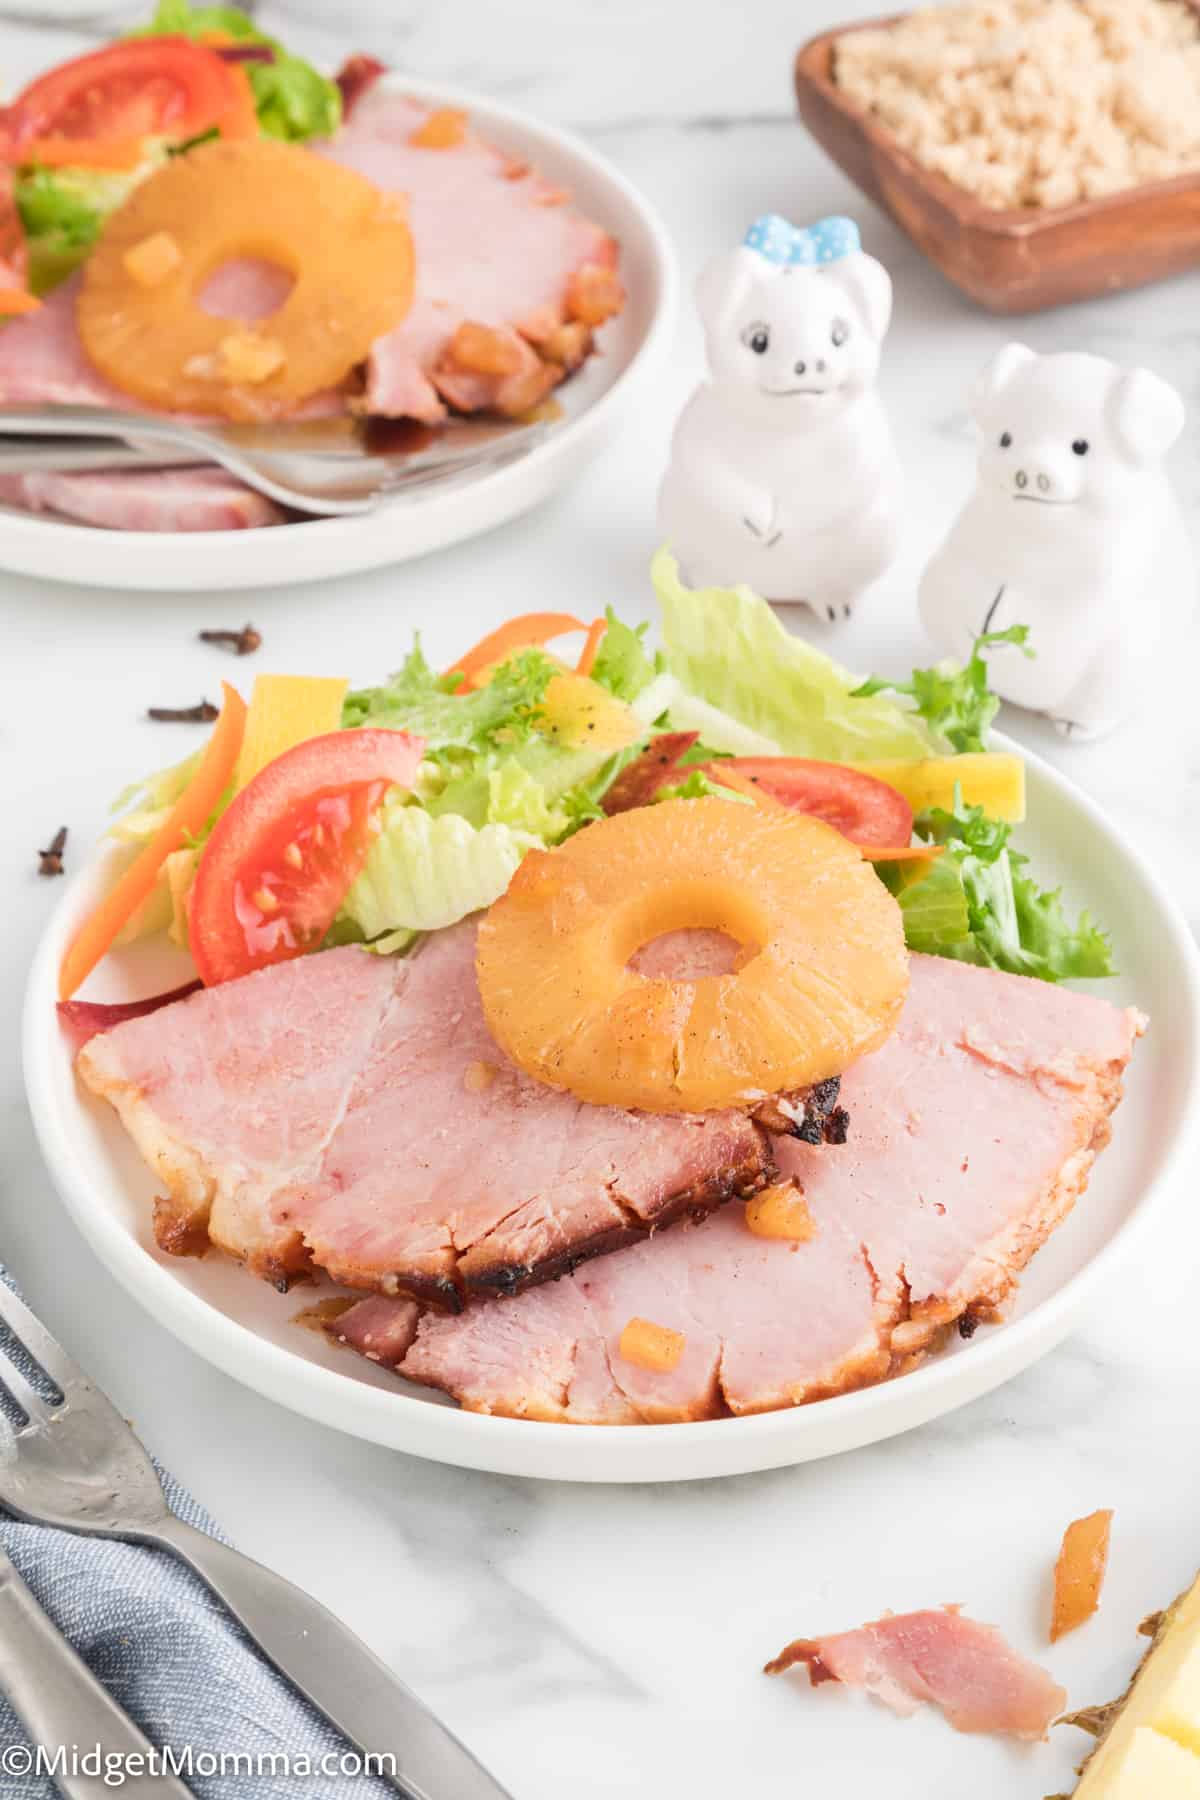 Baked Ham with Pineapple and Brown Sugar Glaze on a plate being served with a fresh salad